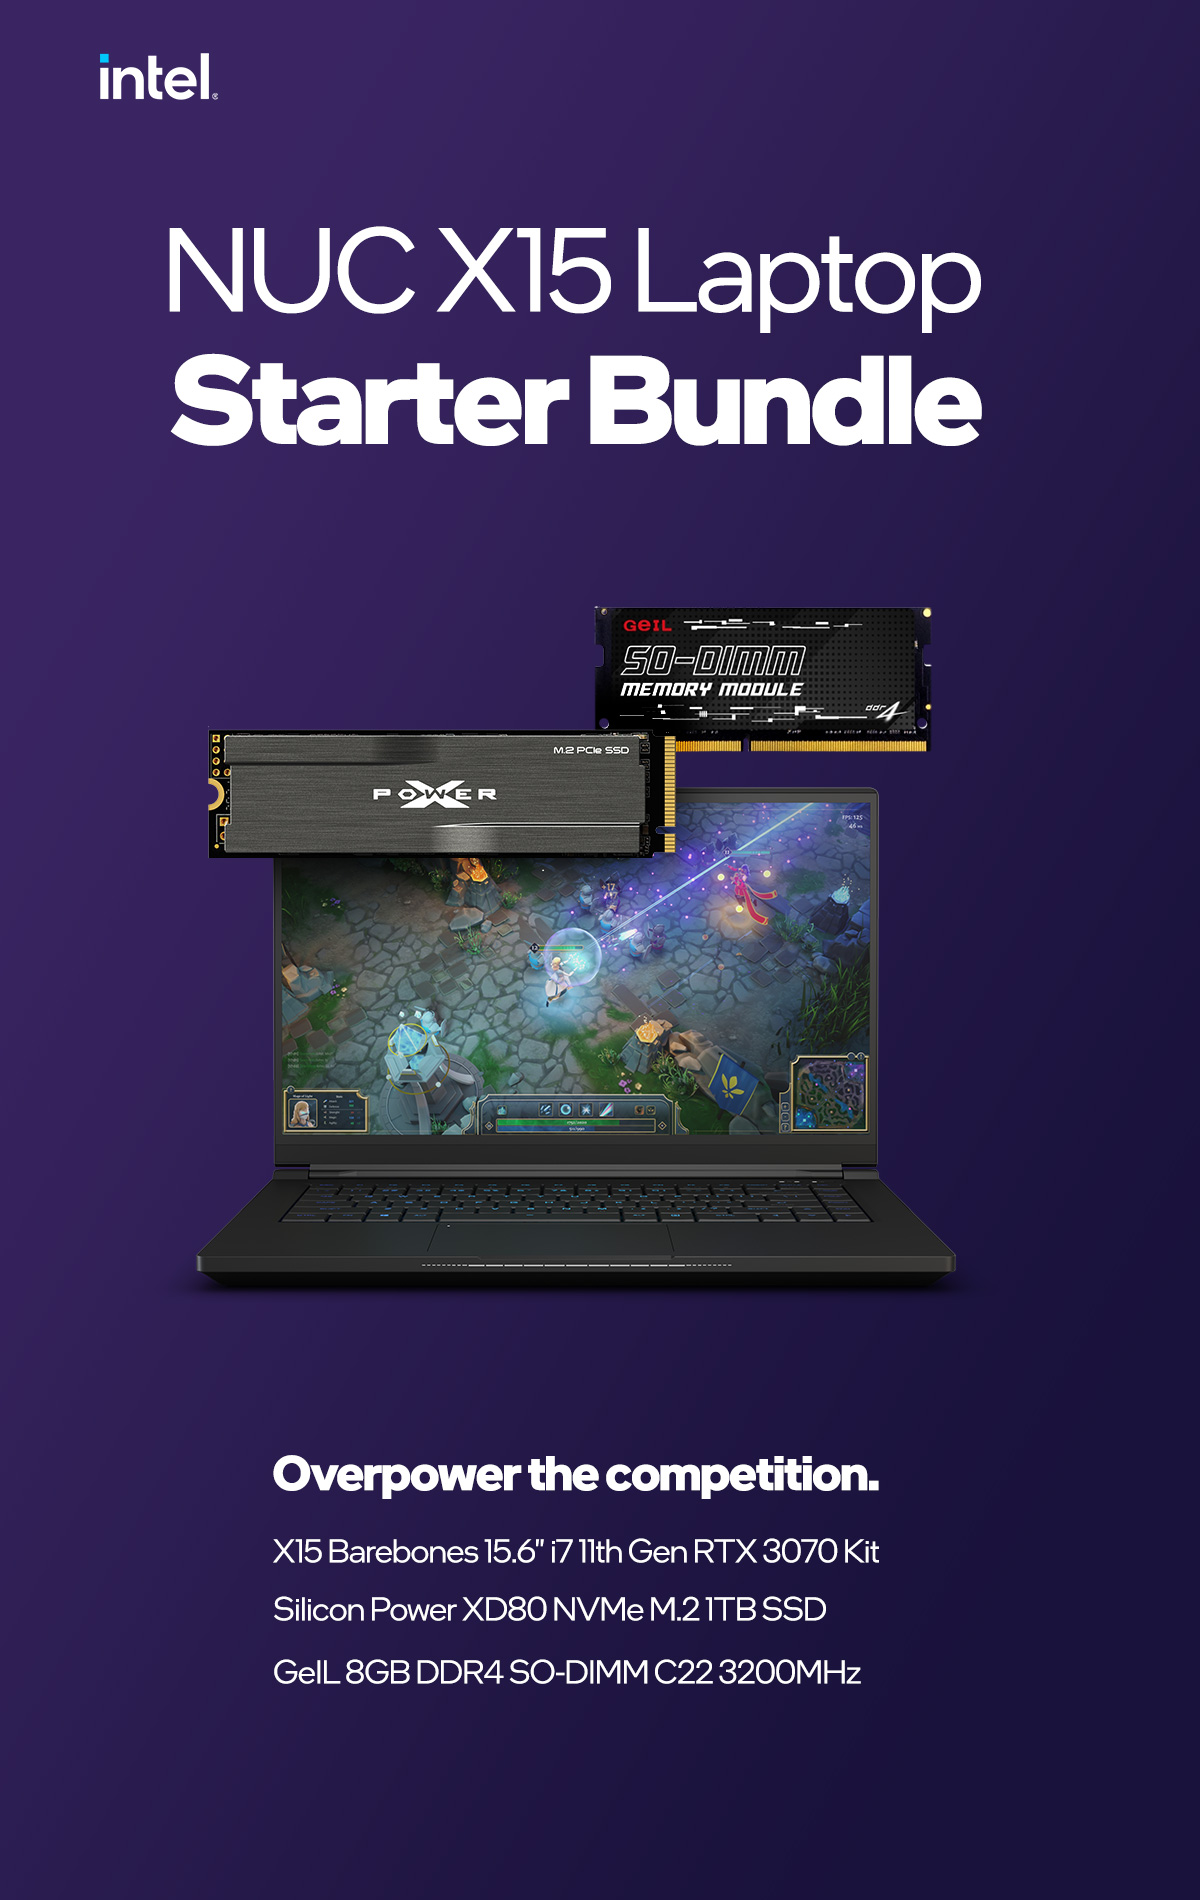 A large marketing image providing additional information about the product Intel DIY Laptop Saver Bundle - Additional alt info not provided